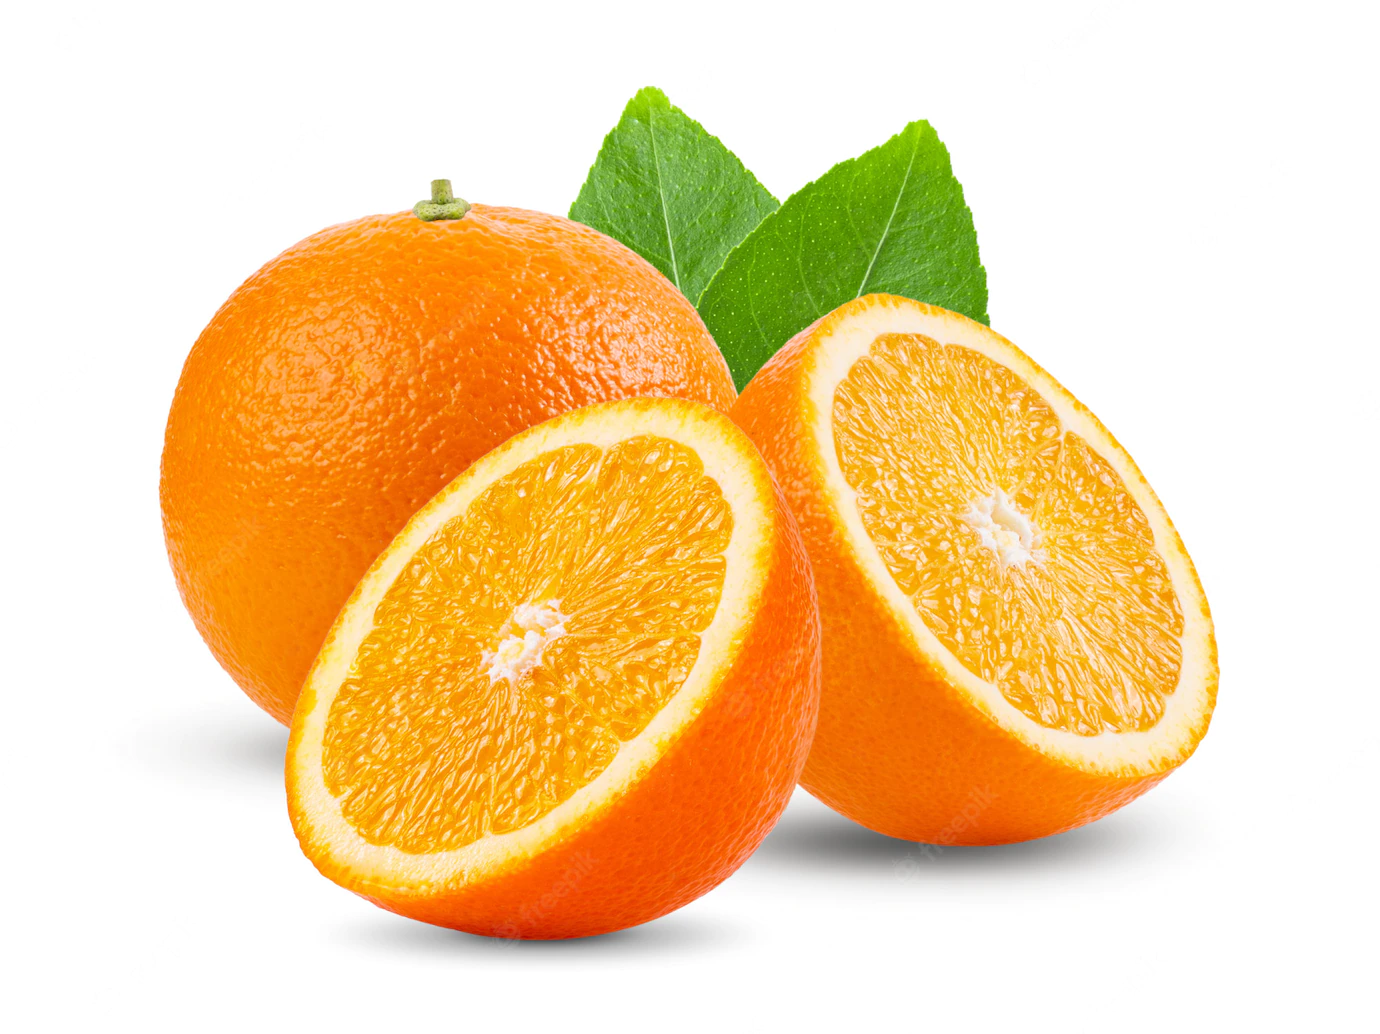 orange-fruit-with-leaves-white-wall_253984-3354